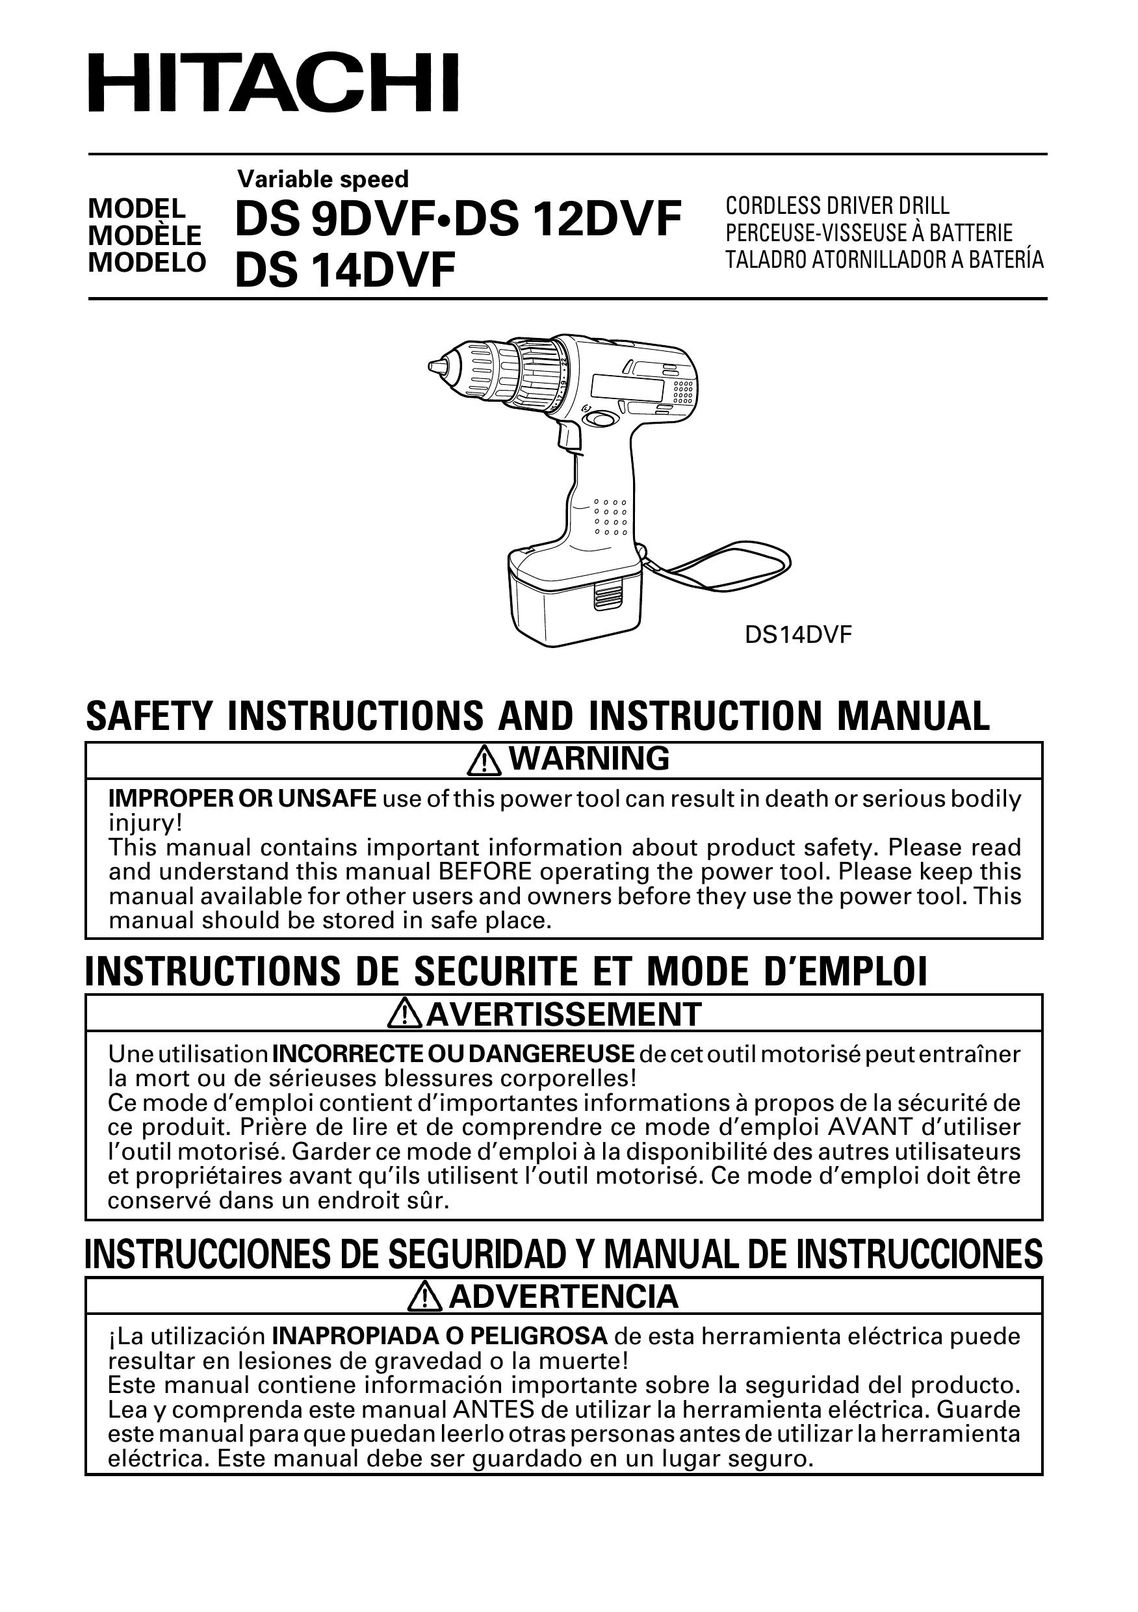 Hitachi DS 9DVFDS 12DVF Drill User Manual